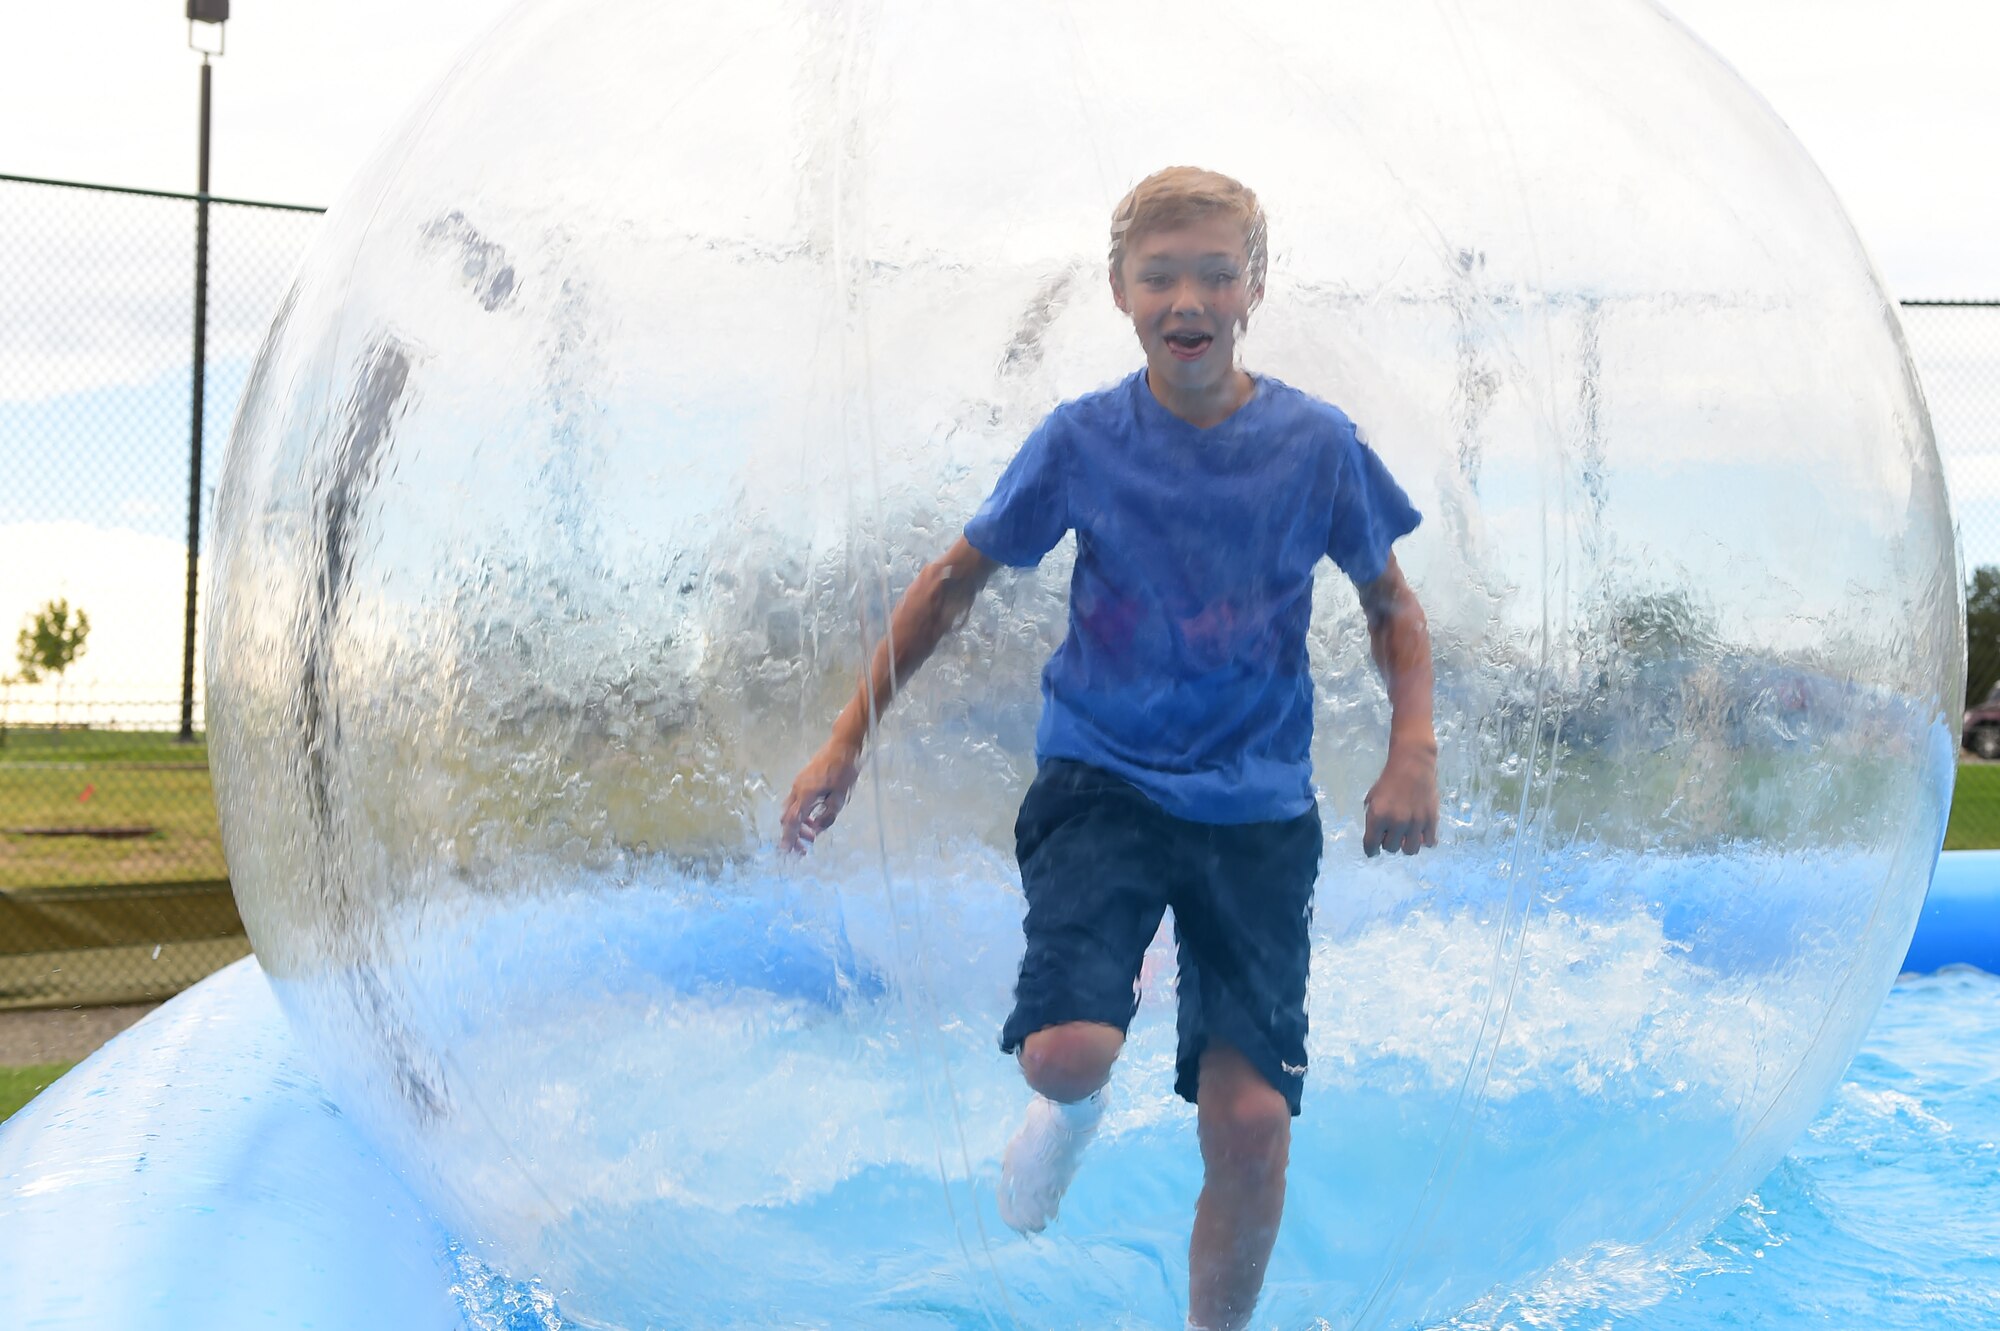 A boy “runs on water” during FunFest July 24, 2015, at Buckley Air Force Base, Colo. FunFest is an annual base-wide event that includes family-friendly games and activities, community involvement and local business sponsors. (U.S. Air Force photo by Airman 1st Class Luke W. Nowakowski/Released)